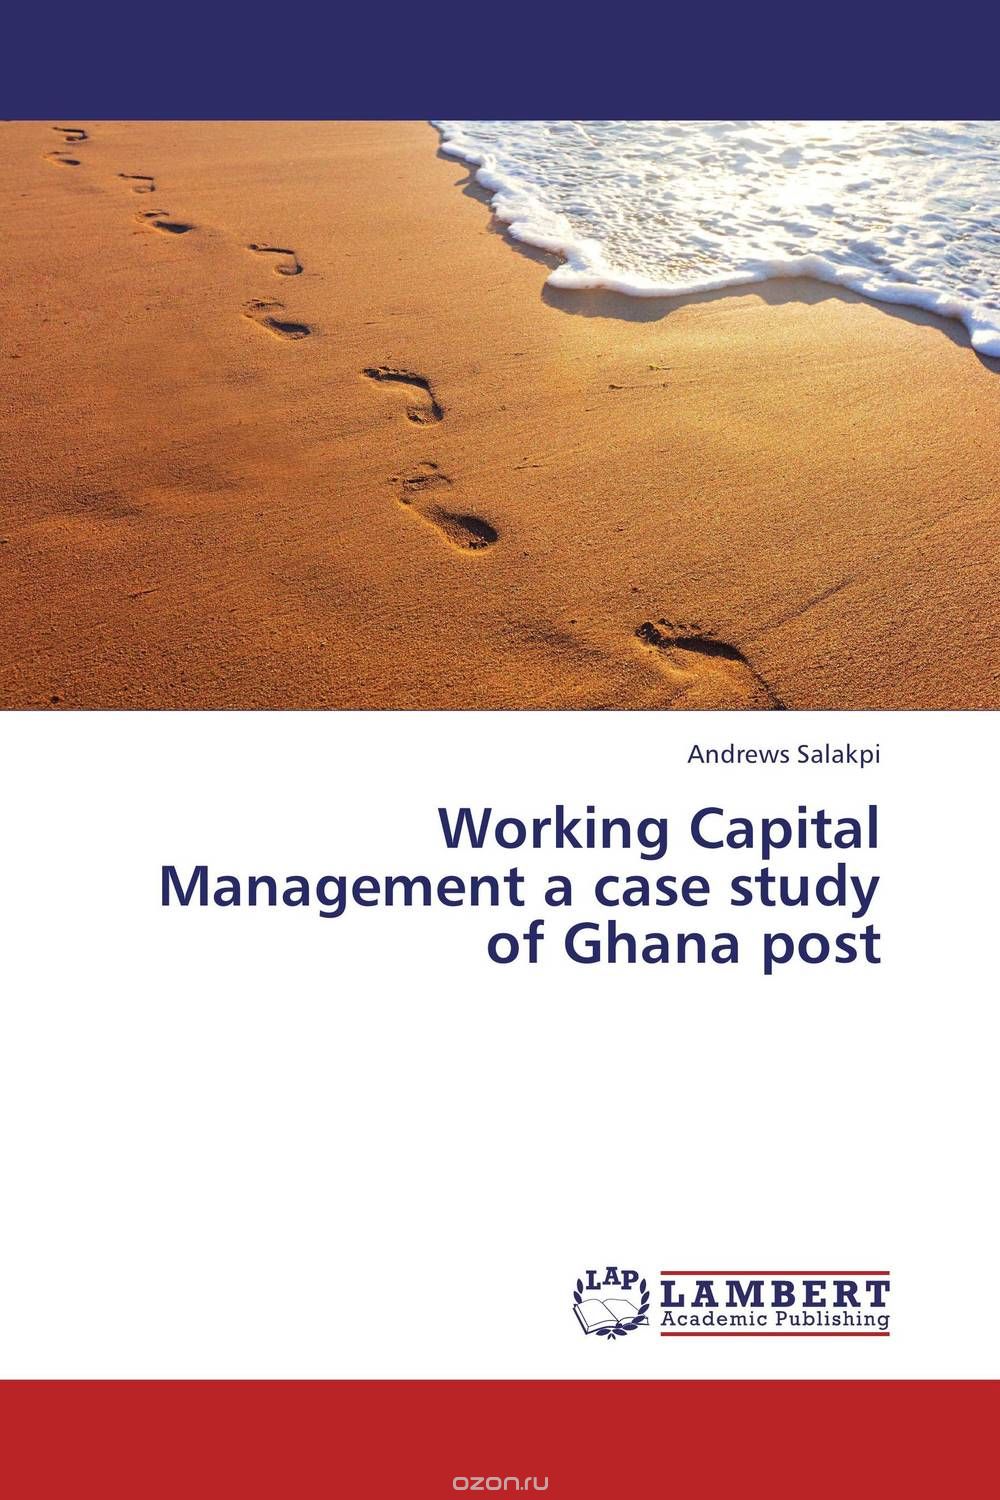 Working Capital Management  a case study of Ghana post